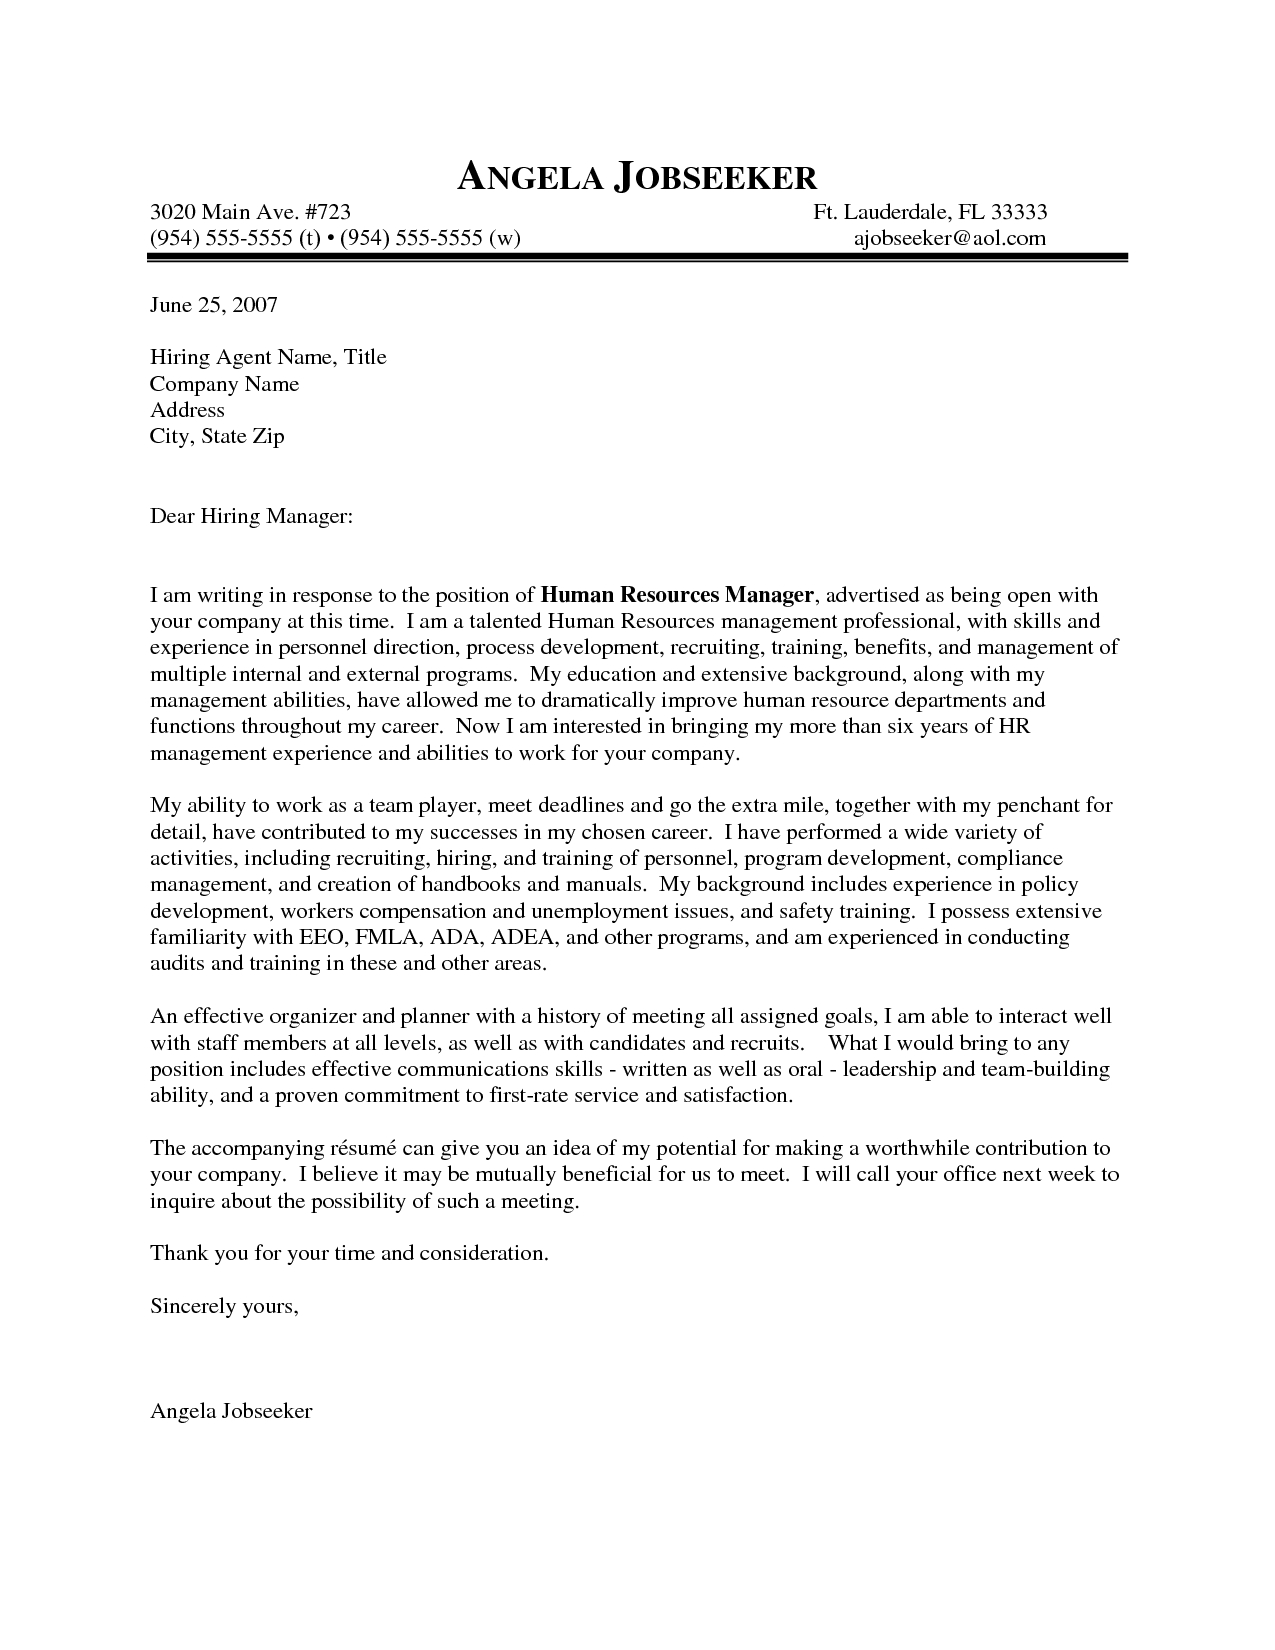 Outstanding Cover Letter Examples Hr Manager Cover Letter throughout dimensions 1275 X 1650